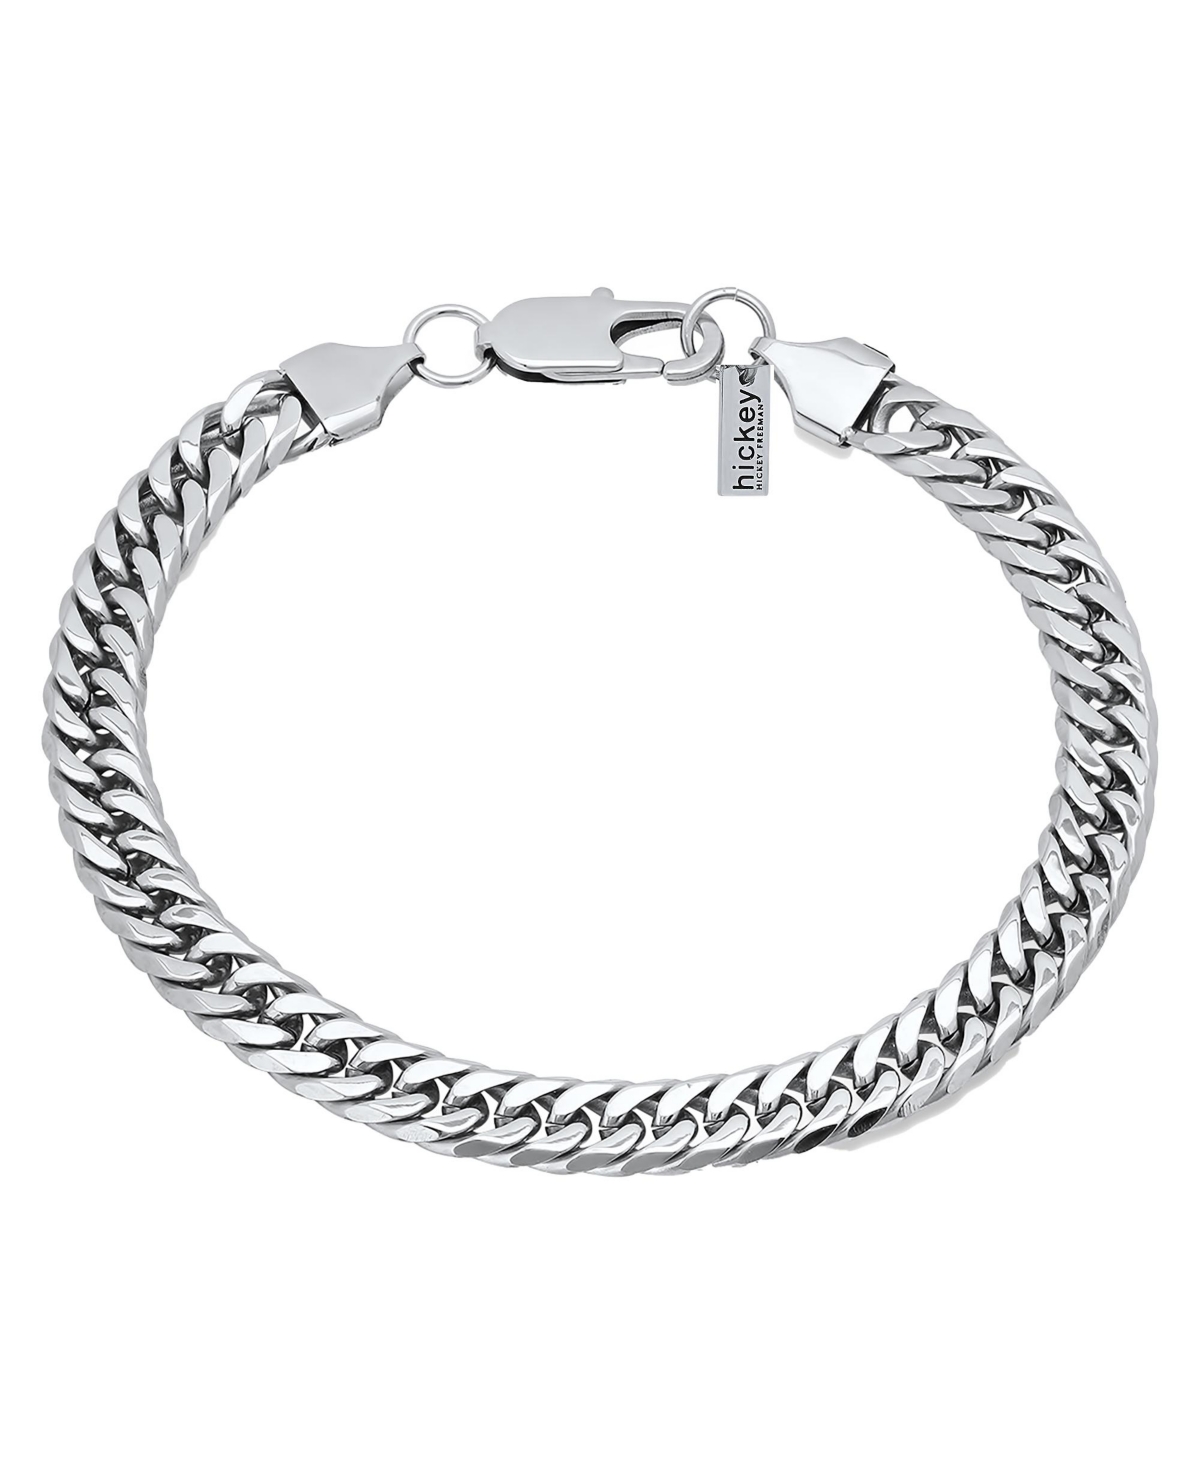 hickey by Hickey Freeman Stainless Steel Wide Flattened Curb Chain Bracelet - Gray